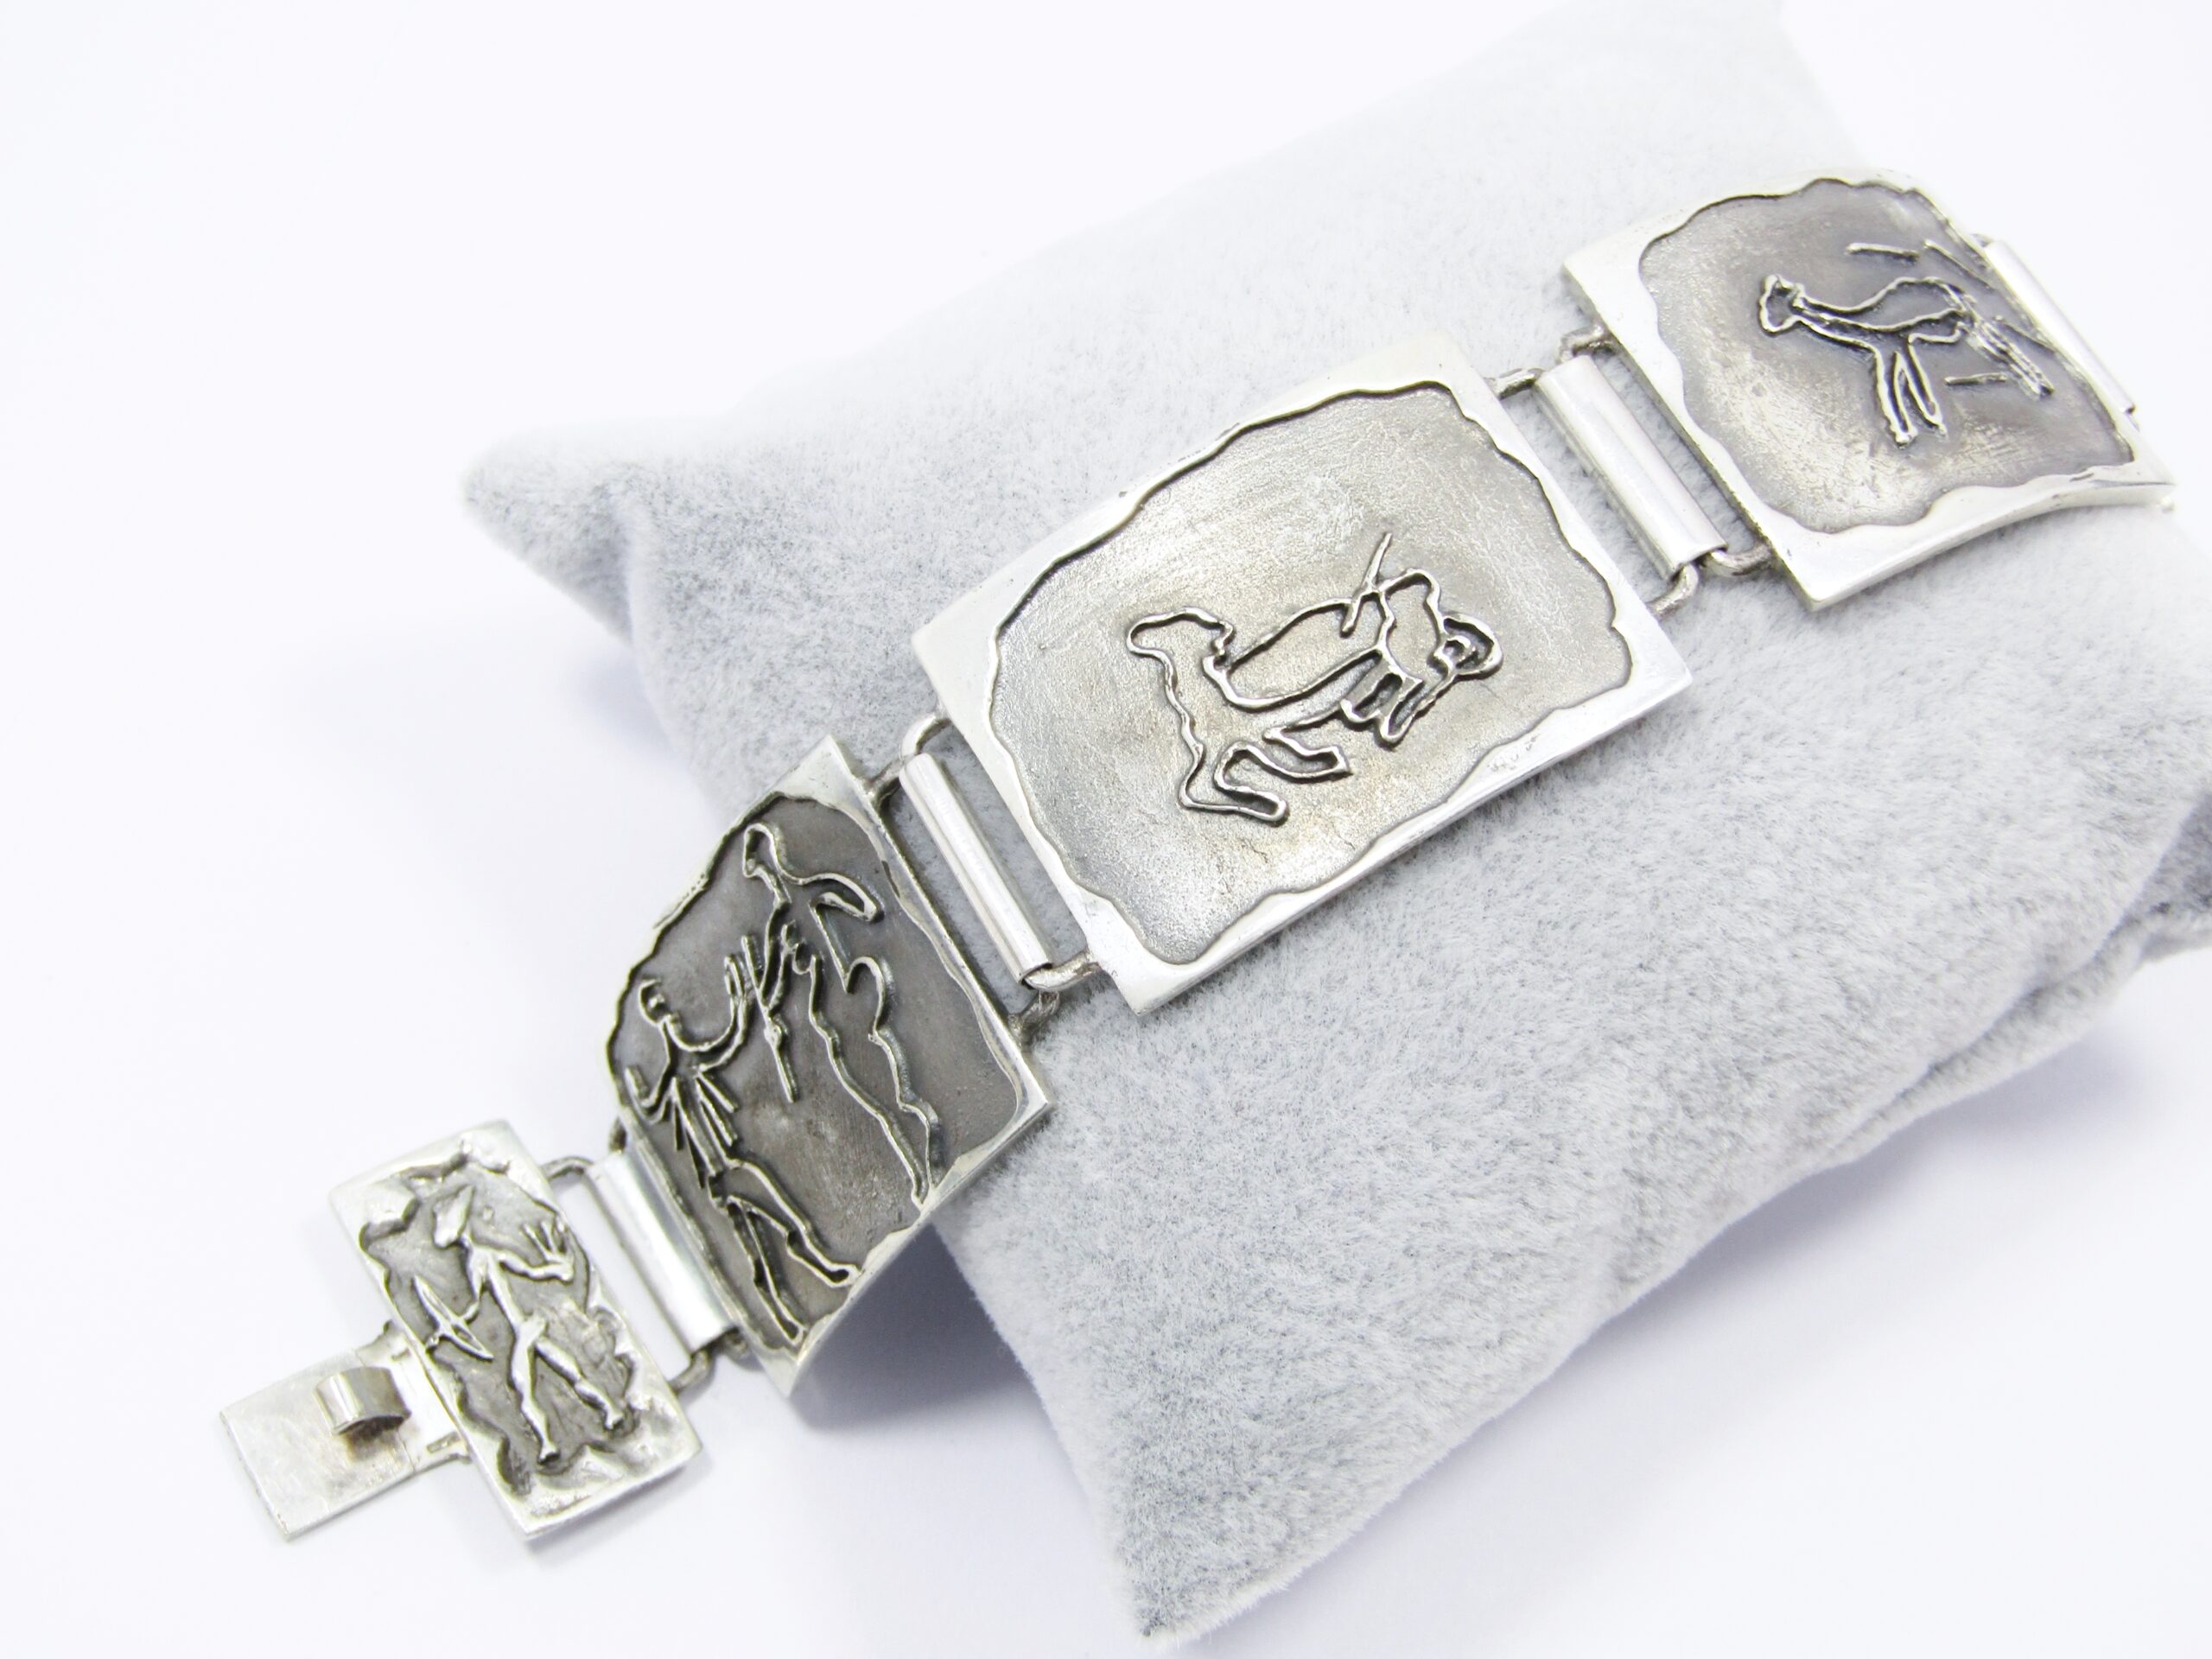 A Gorgeous Chunky Bracelet Depicting Cave art in Sterling Silver